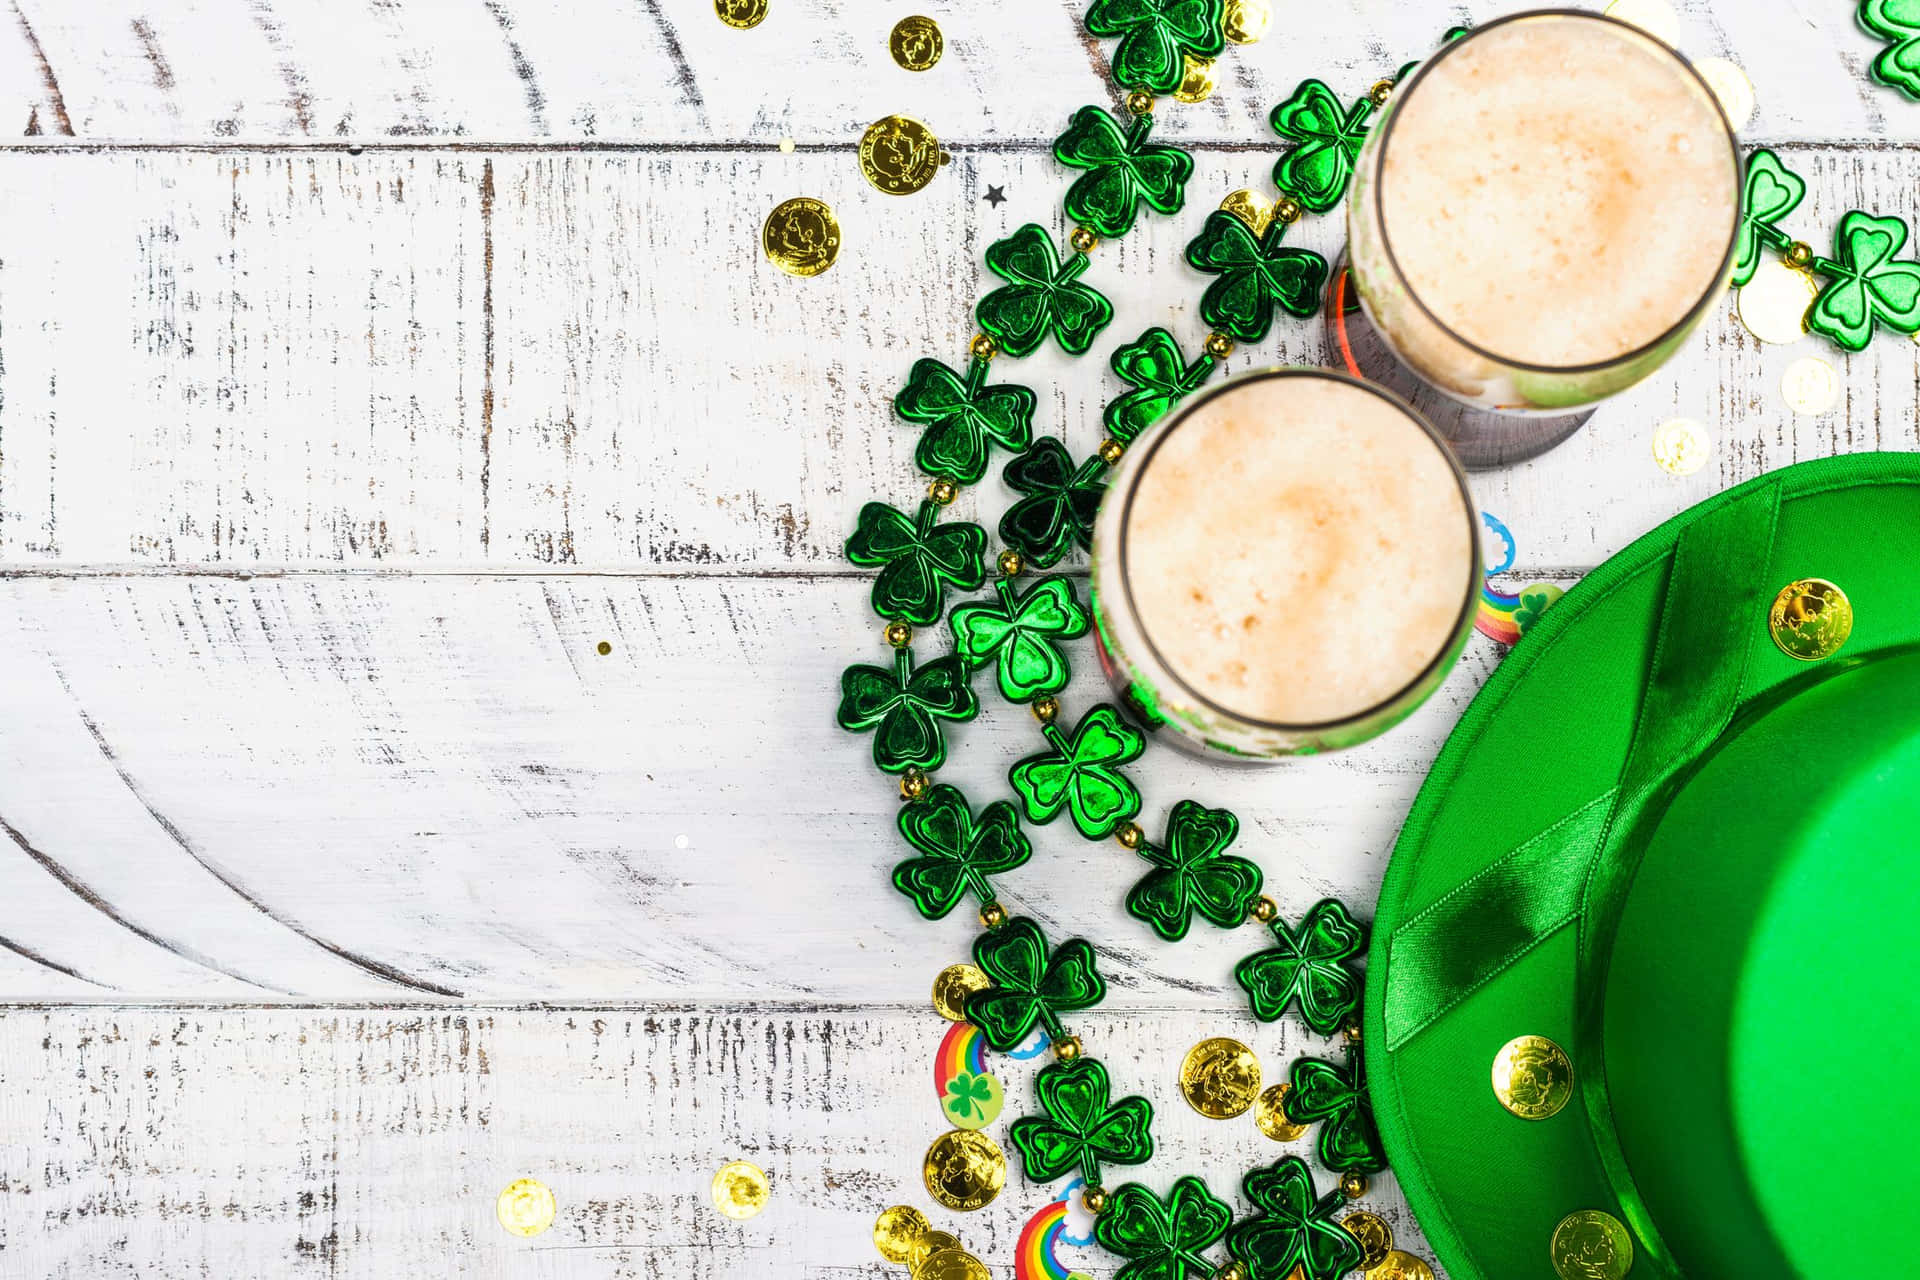 Enjoy a festive celebration of St Patrick's Day on Zoom with this bright and cheery background